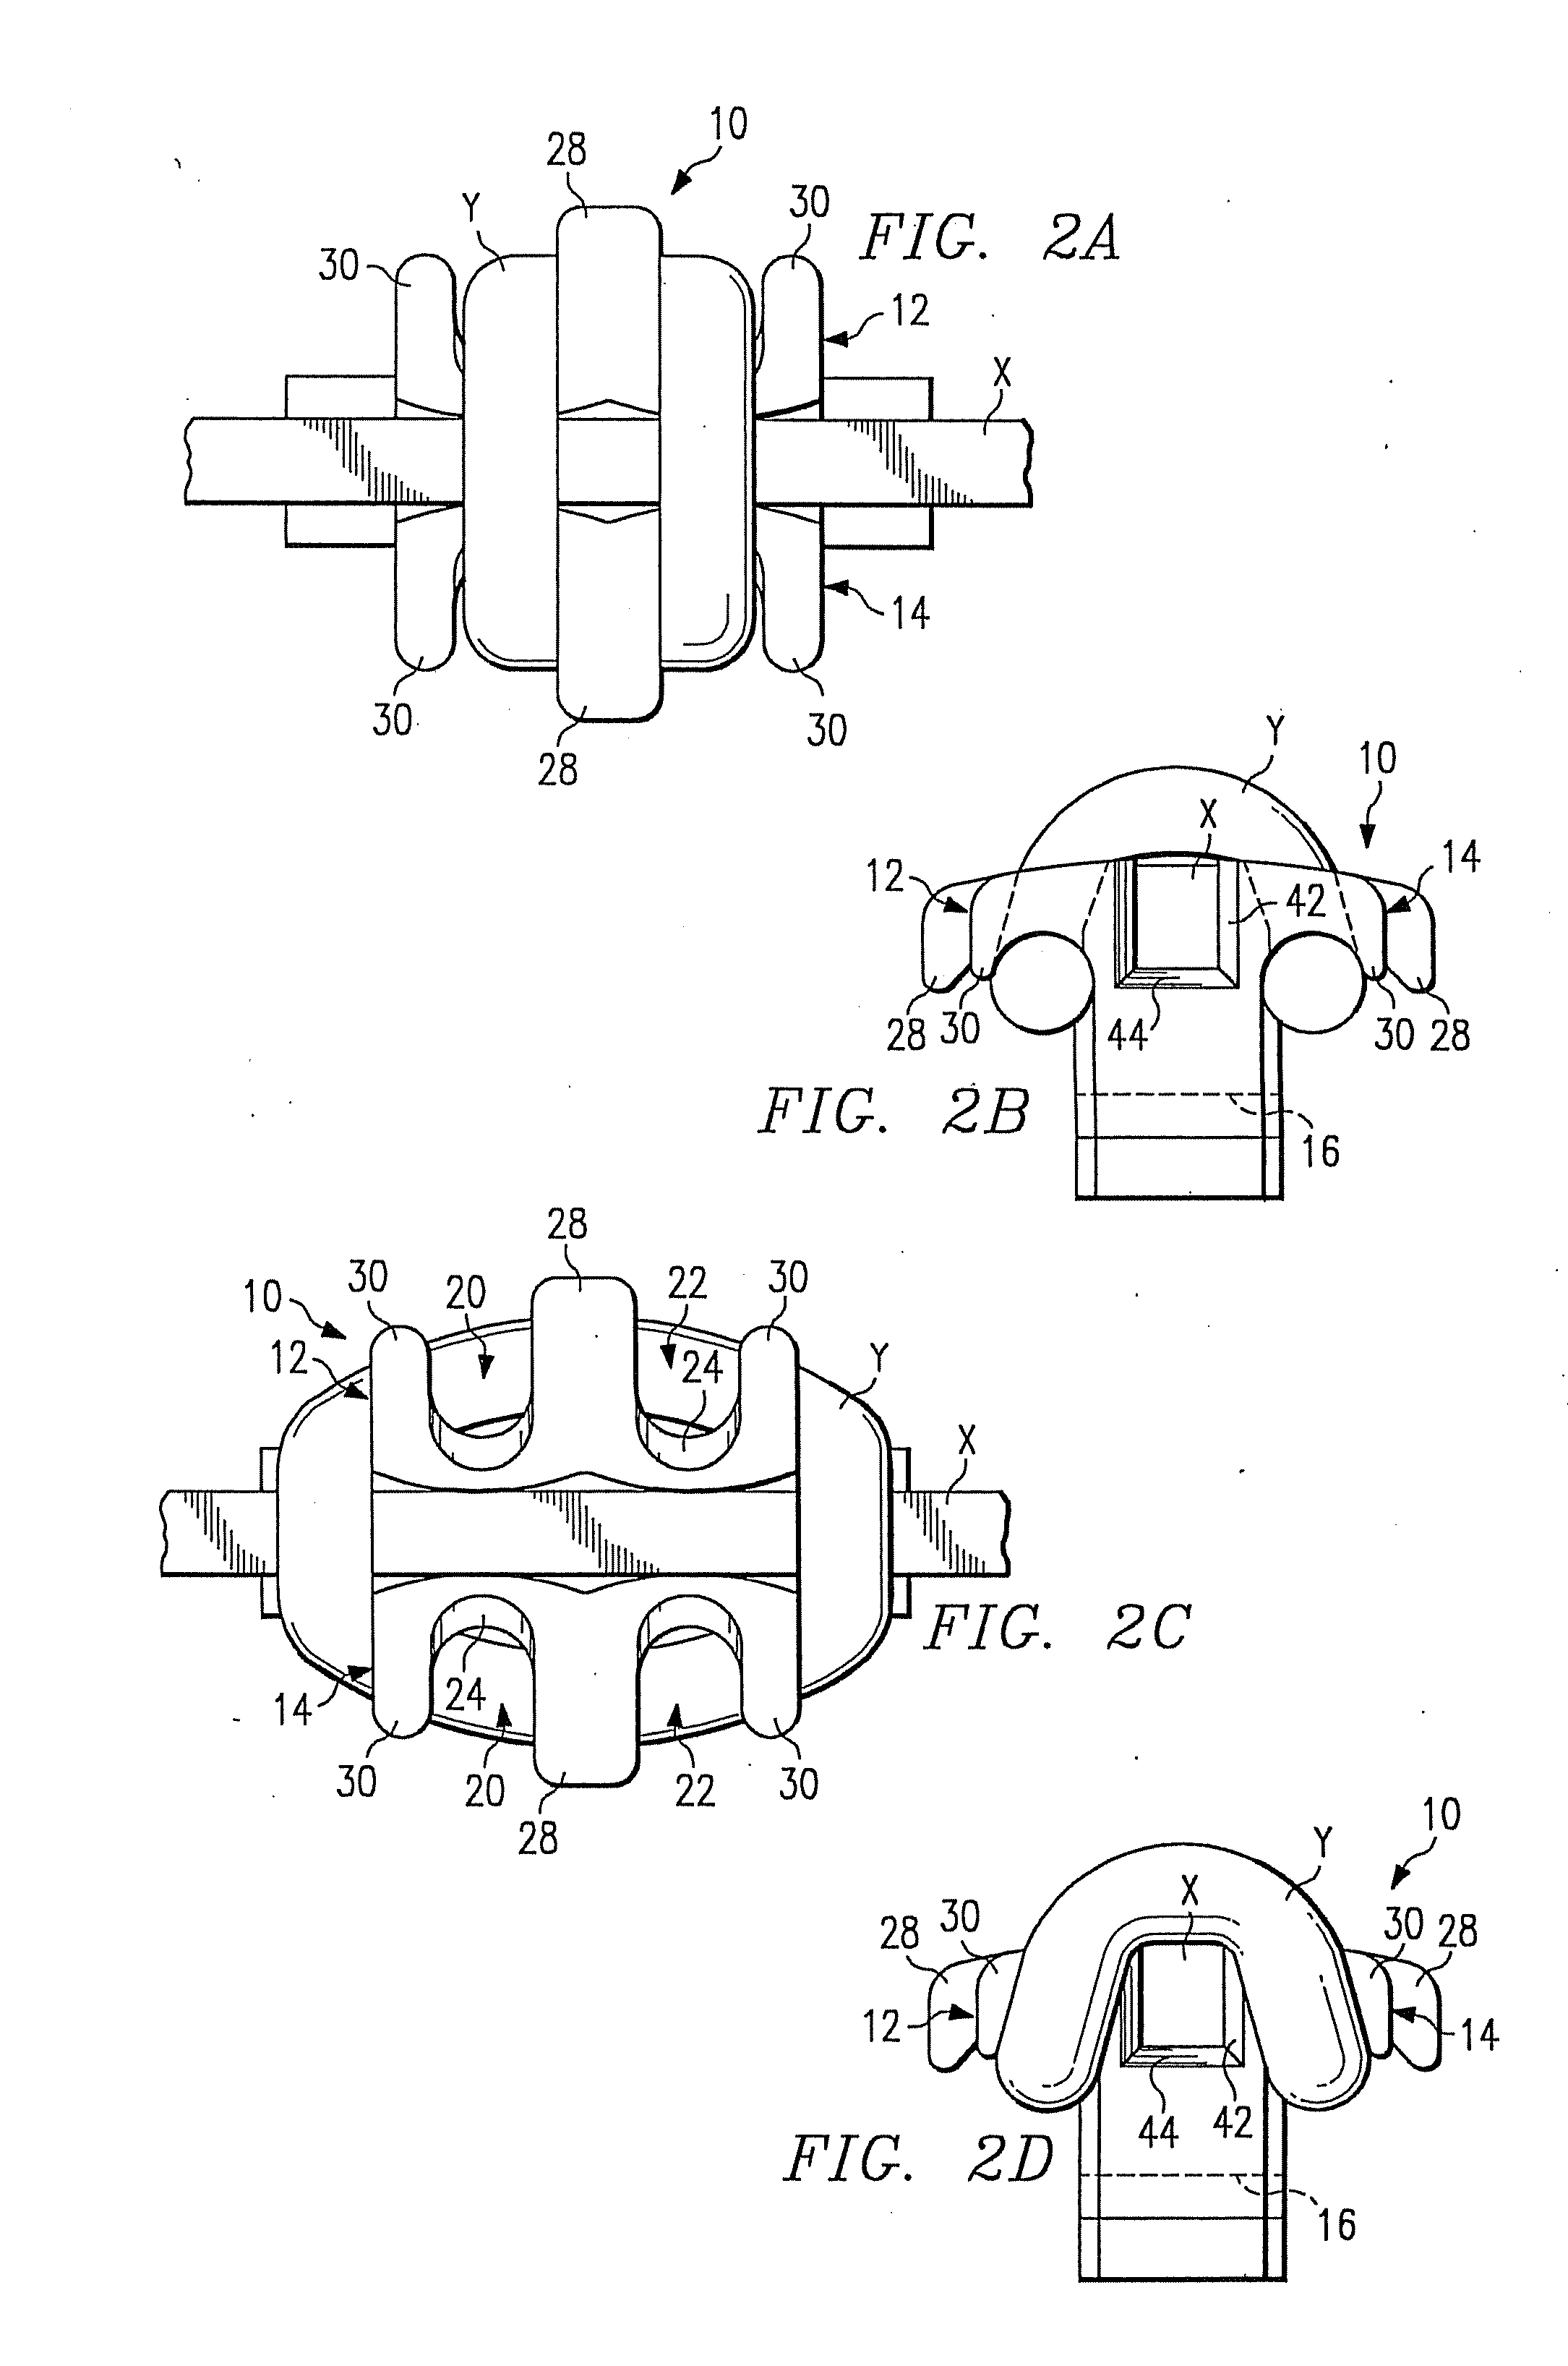 Orthodontic appliance with encoded information formed in the base